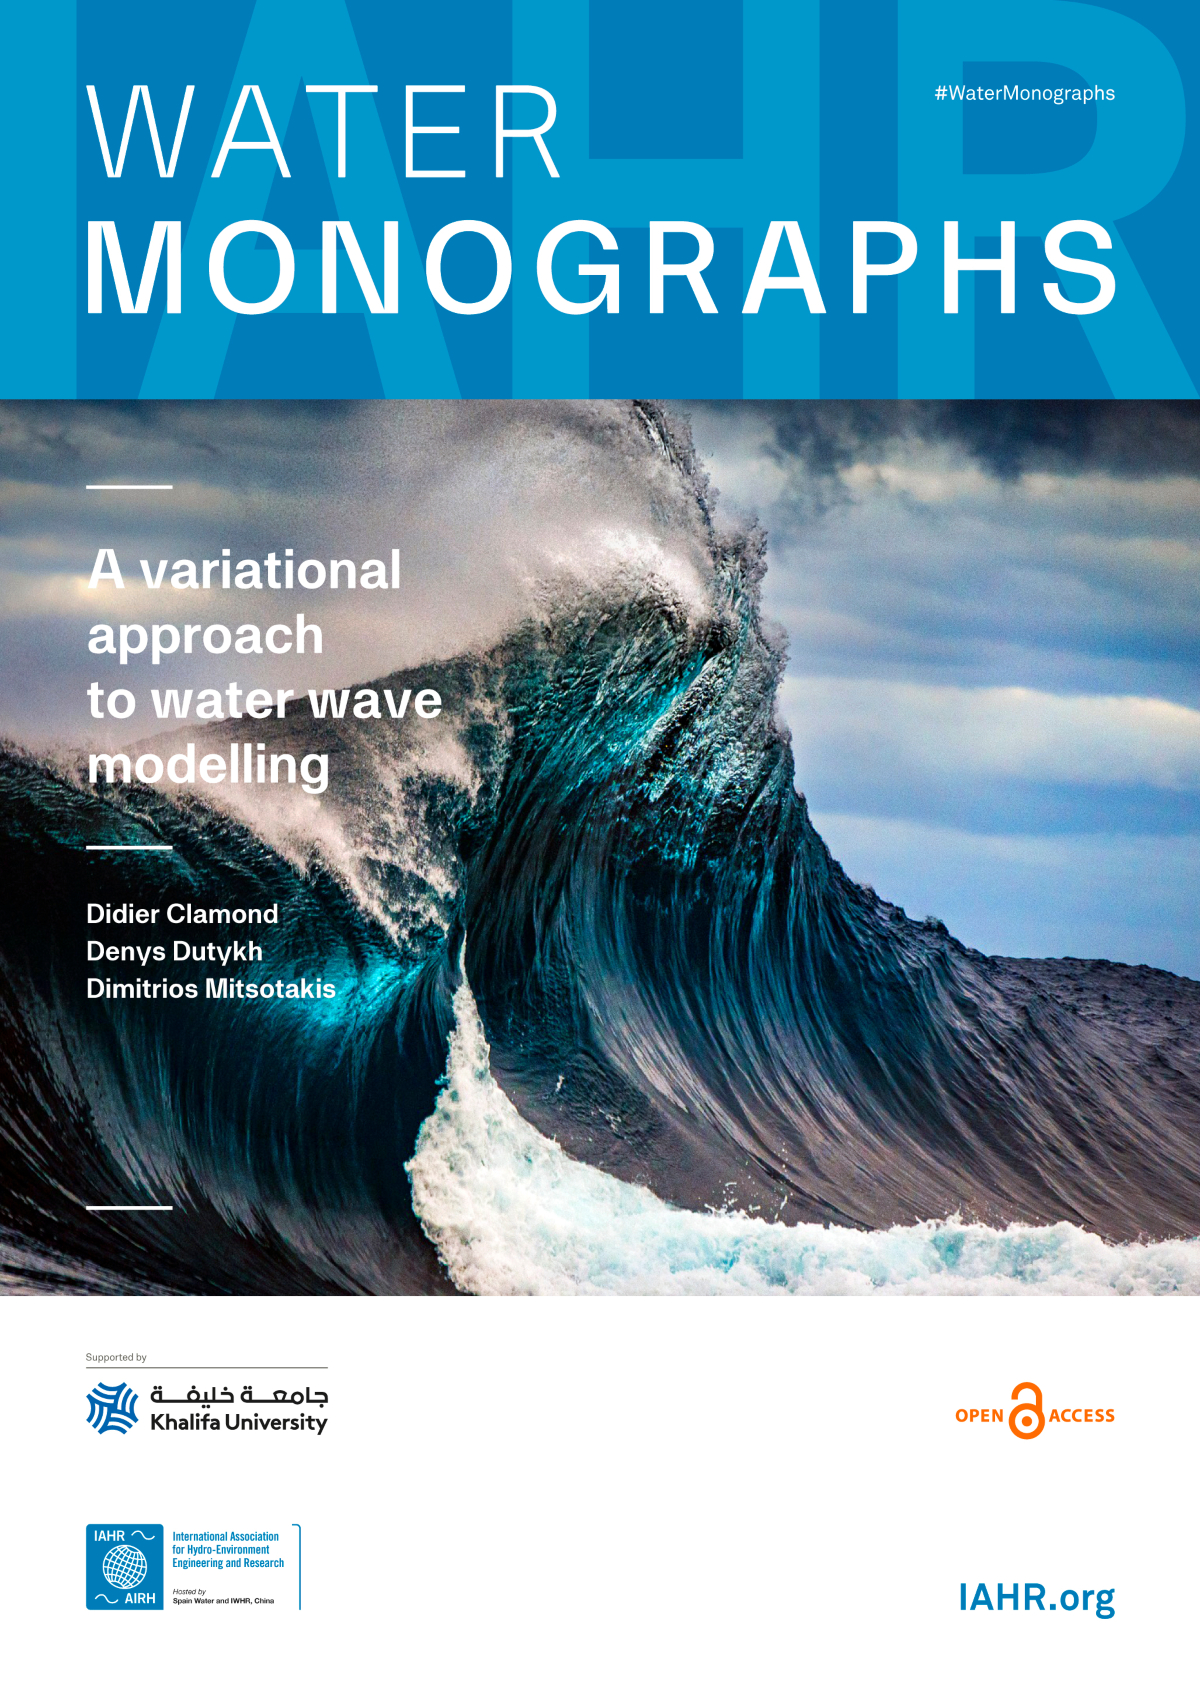 Water Monograph 3 | Variational approach to water waves modelling